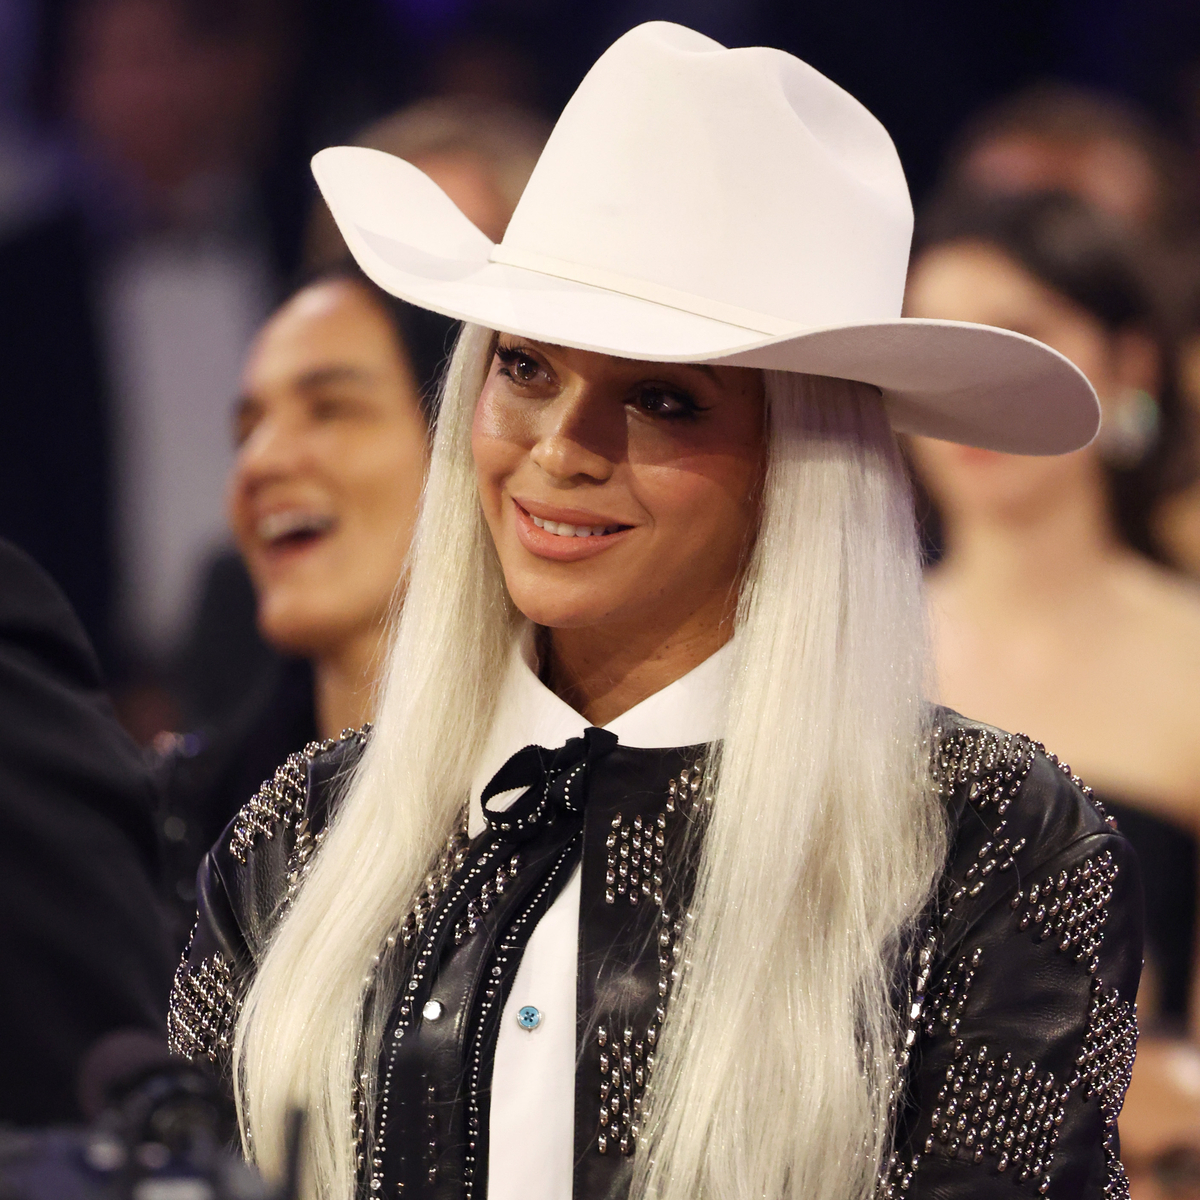 Beyoncé Reveals She Made Cowboy Carter After “Very Clear” Experience of Not Feeling Welcomed